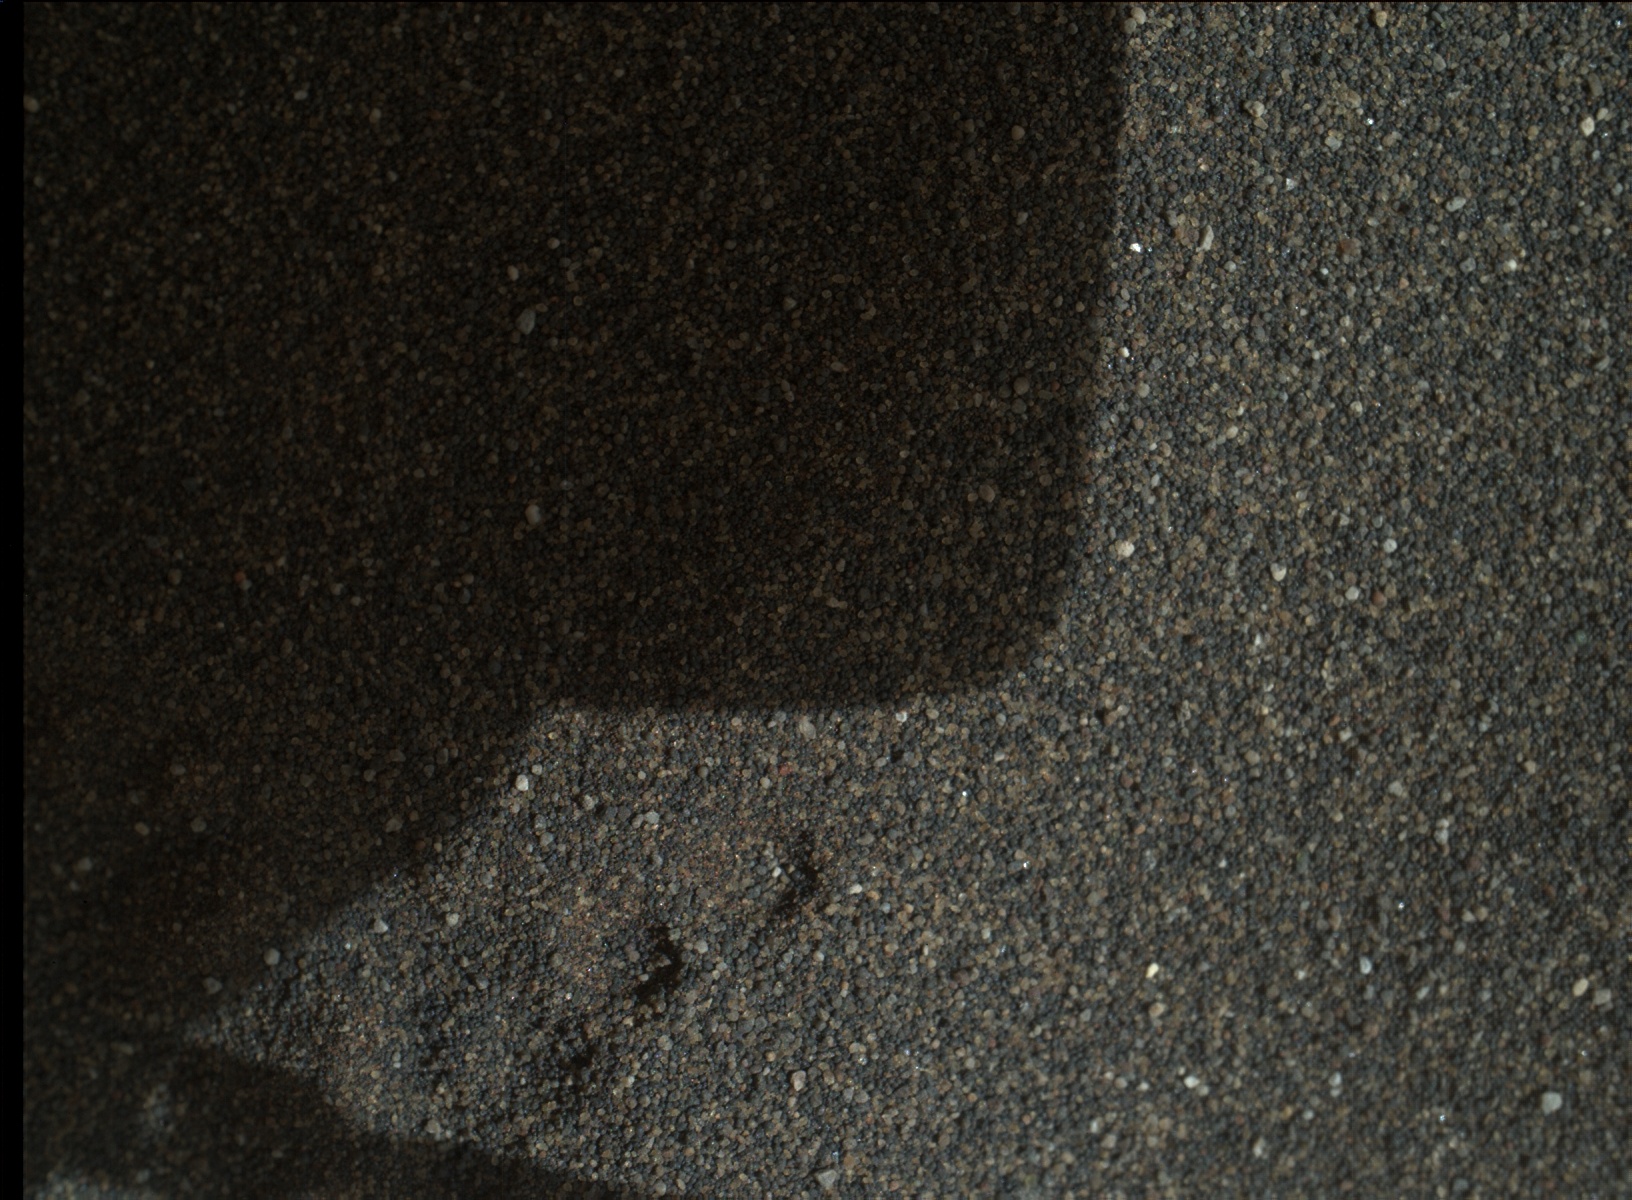 Nasa's Mars rover Curiosity acquired this image using its Mars Hand Lens Imager (MAHLI) on Sol 1242